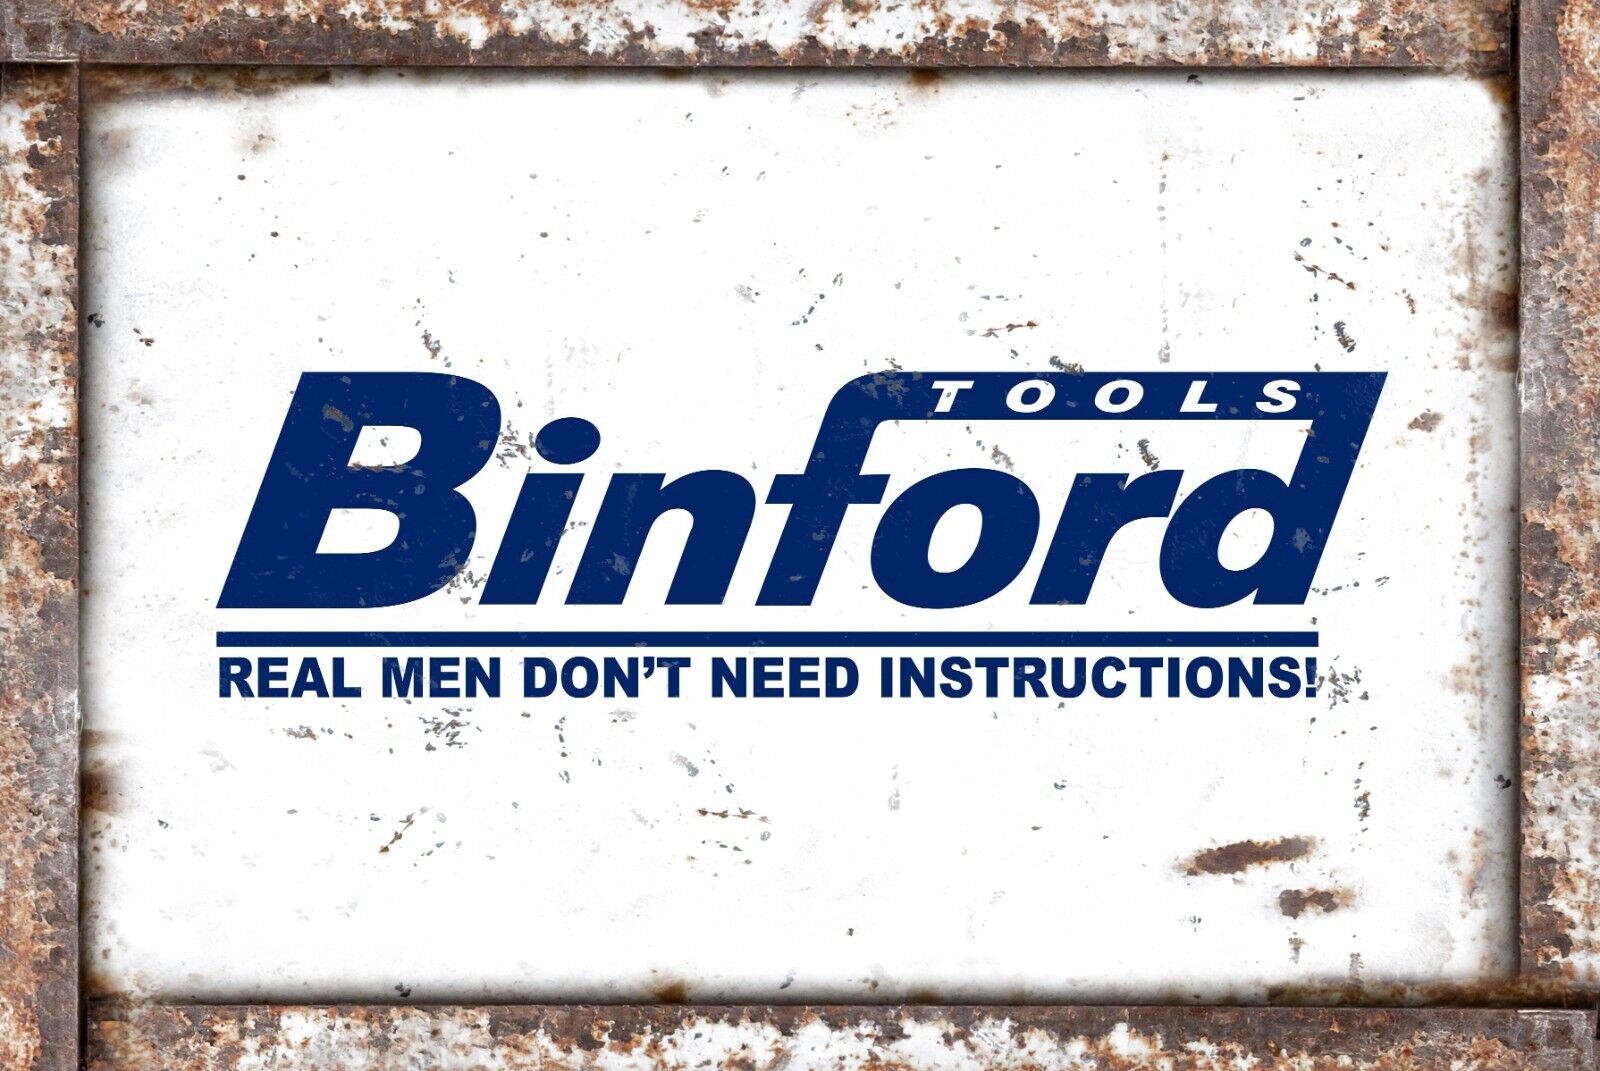 Binford Tools Home Improvement 8x12 Rustic Vintage Style Tin Sign Metal Poster